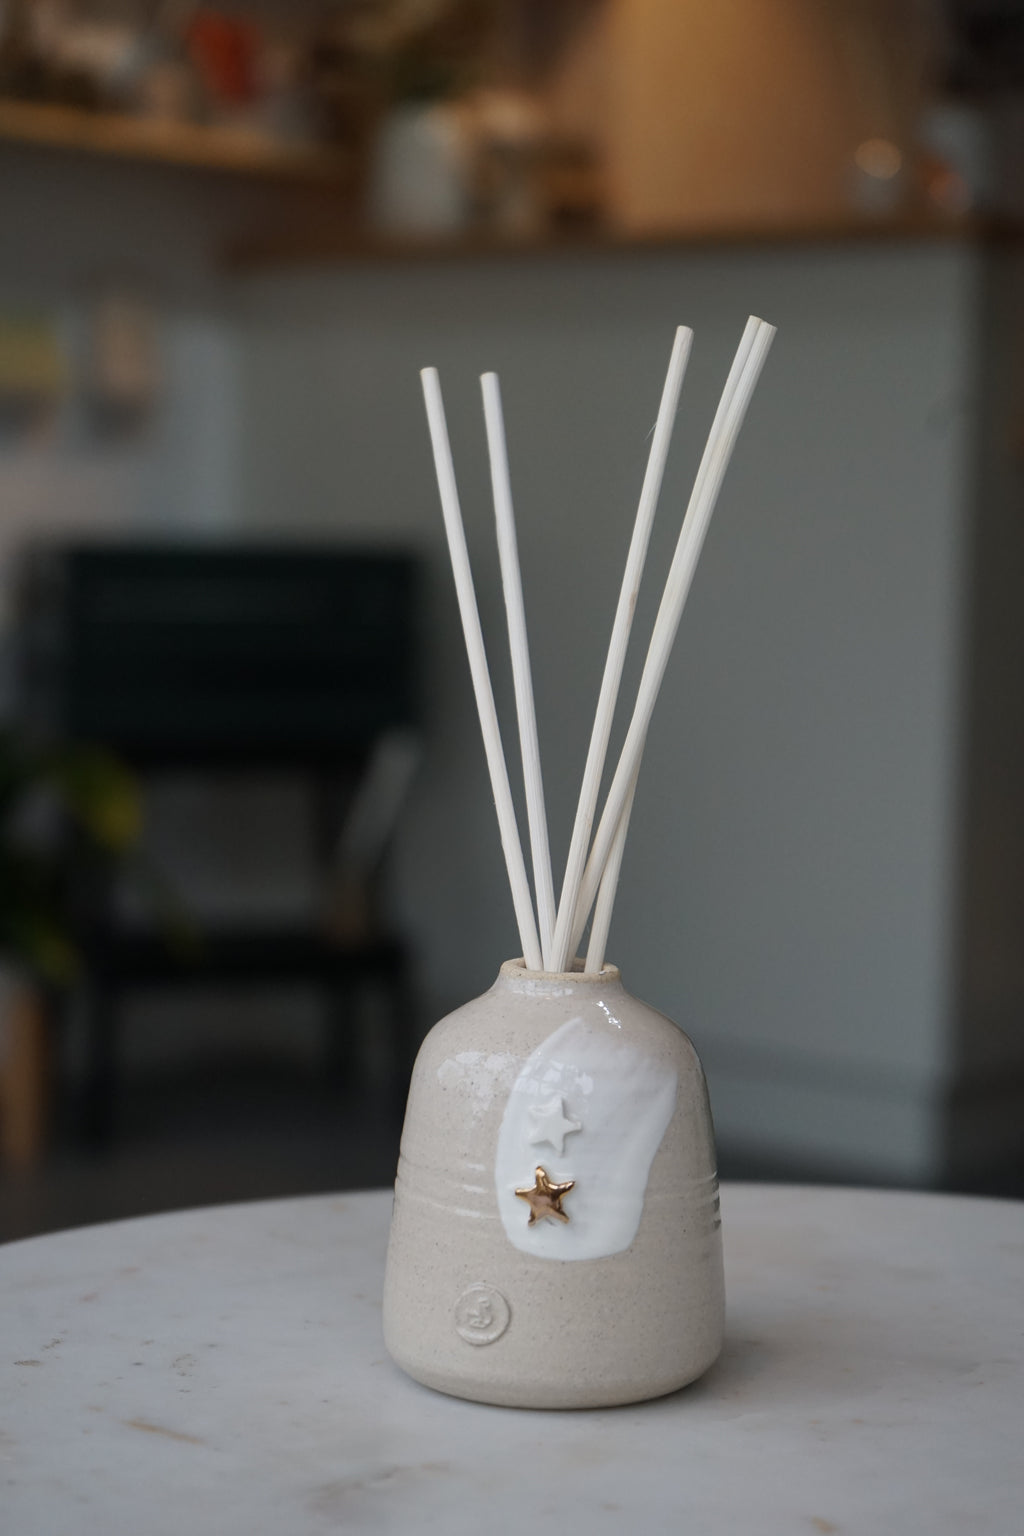 STAR Reed Diffuser